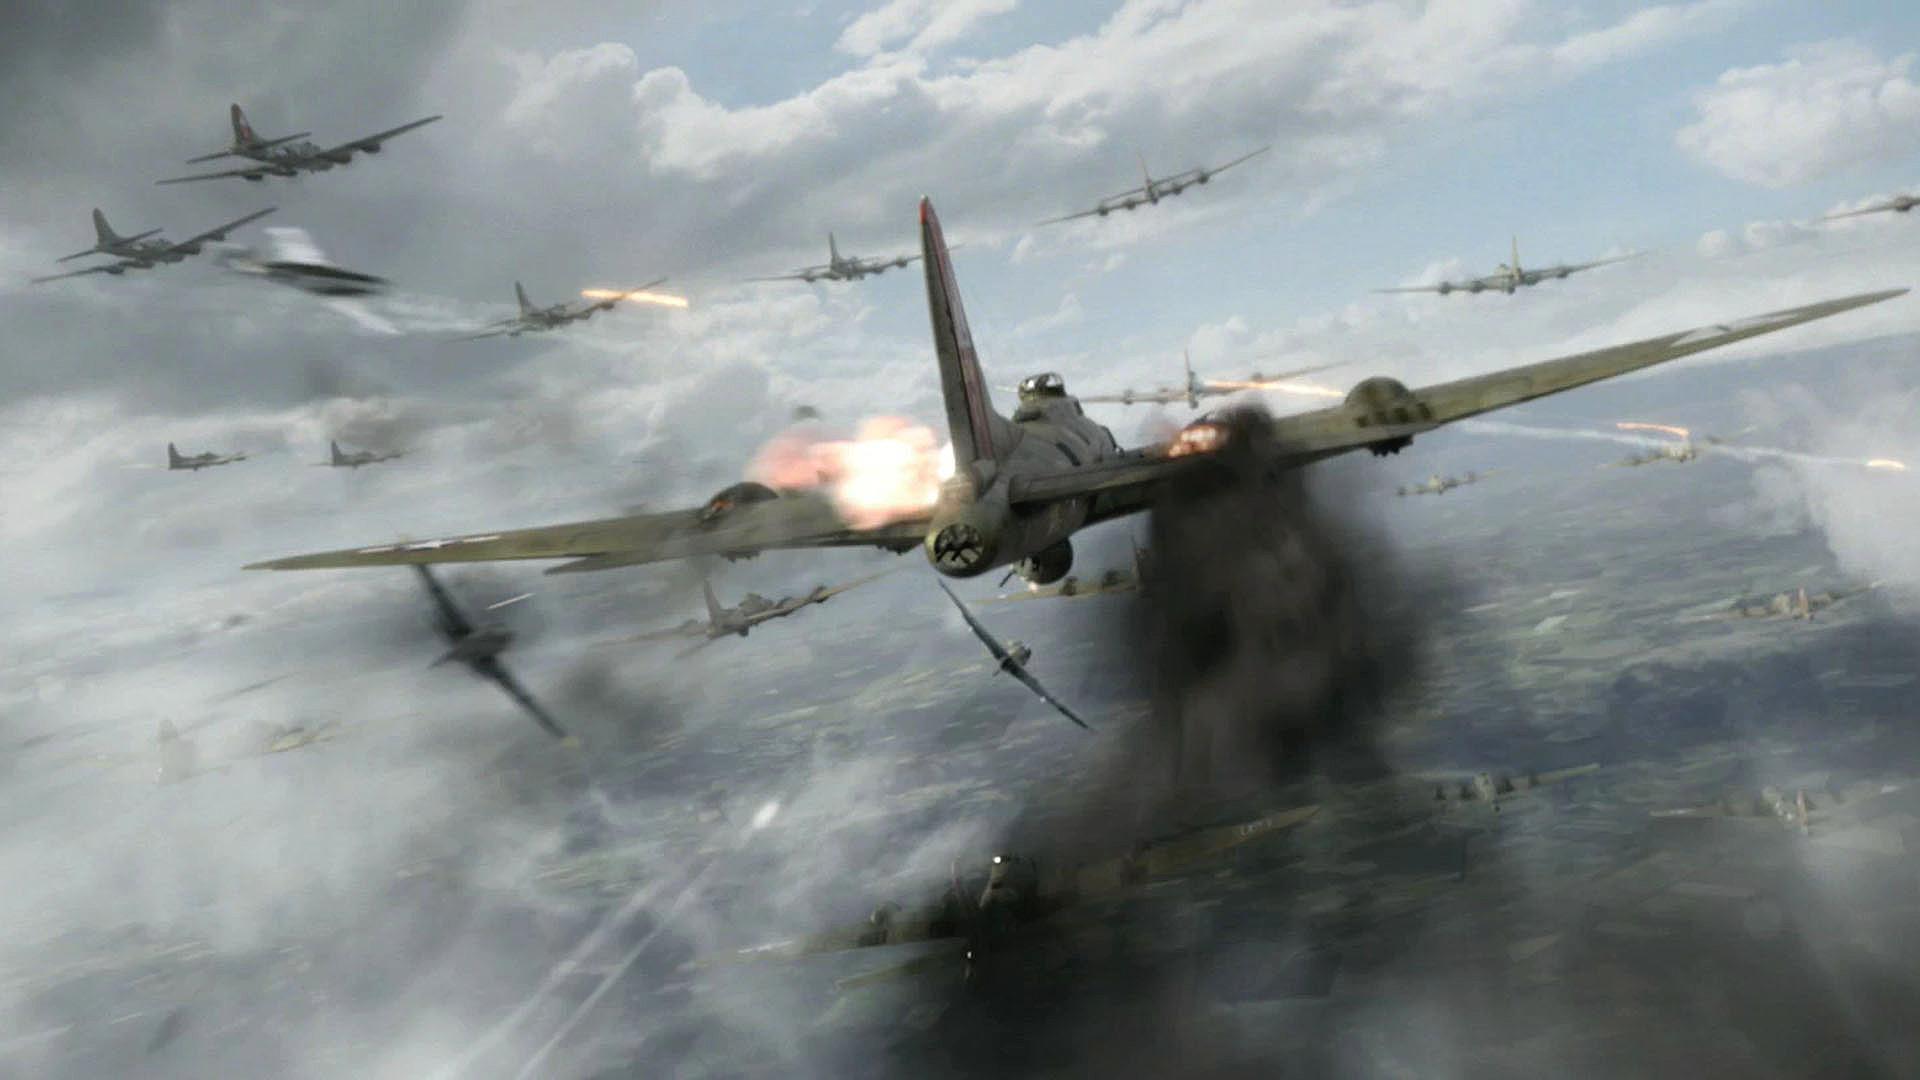 Red Tails Shot Down In Flames Wallpaper 1920x1080 px Free Download